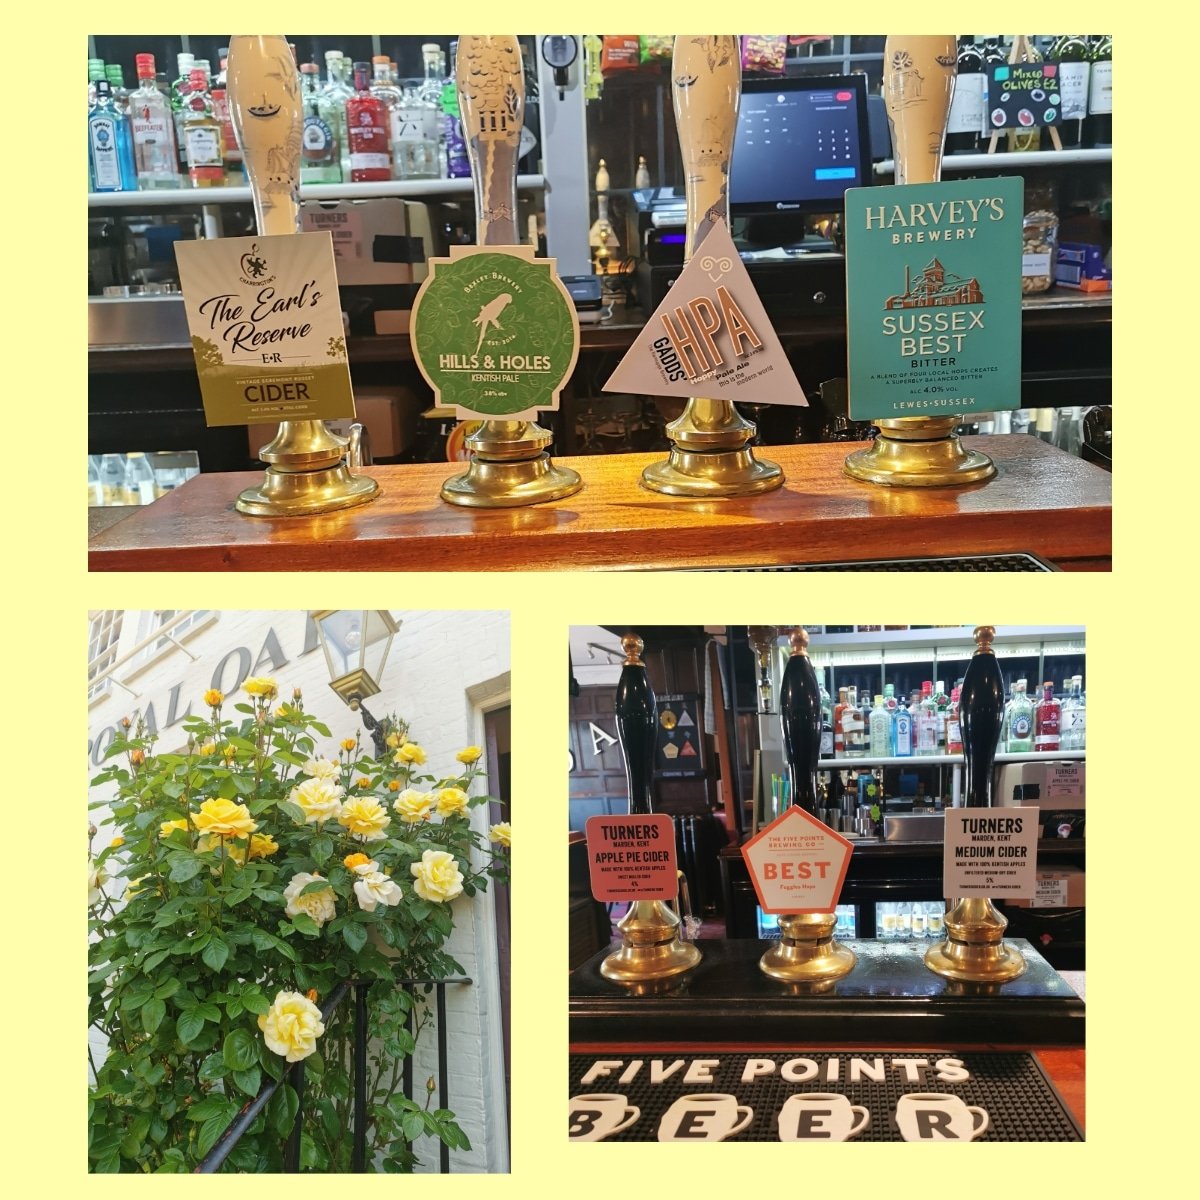 Today's cask ales now pouring.

Why not join us today for a pint of fabulous cask ale in our lovely sunny front garden.

OPEN from 12pm

#harveysbrewery #gaddsbrewery #bexleybrewery #fivepointsbrewingco #westkentcamra #twcaskale #twpubs #twrealale #realale